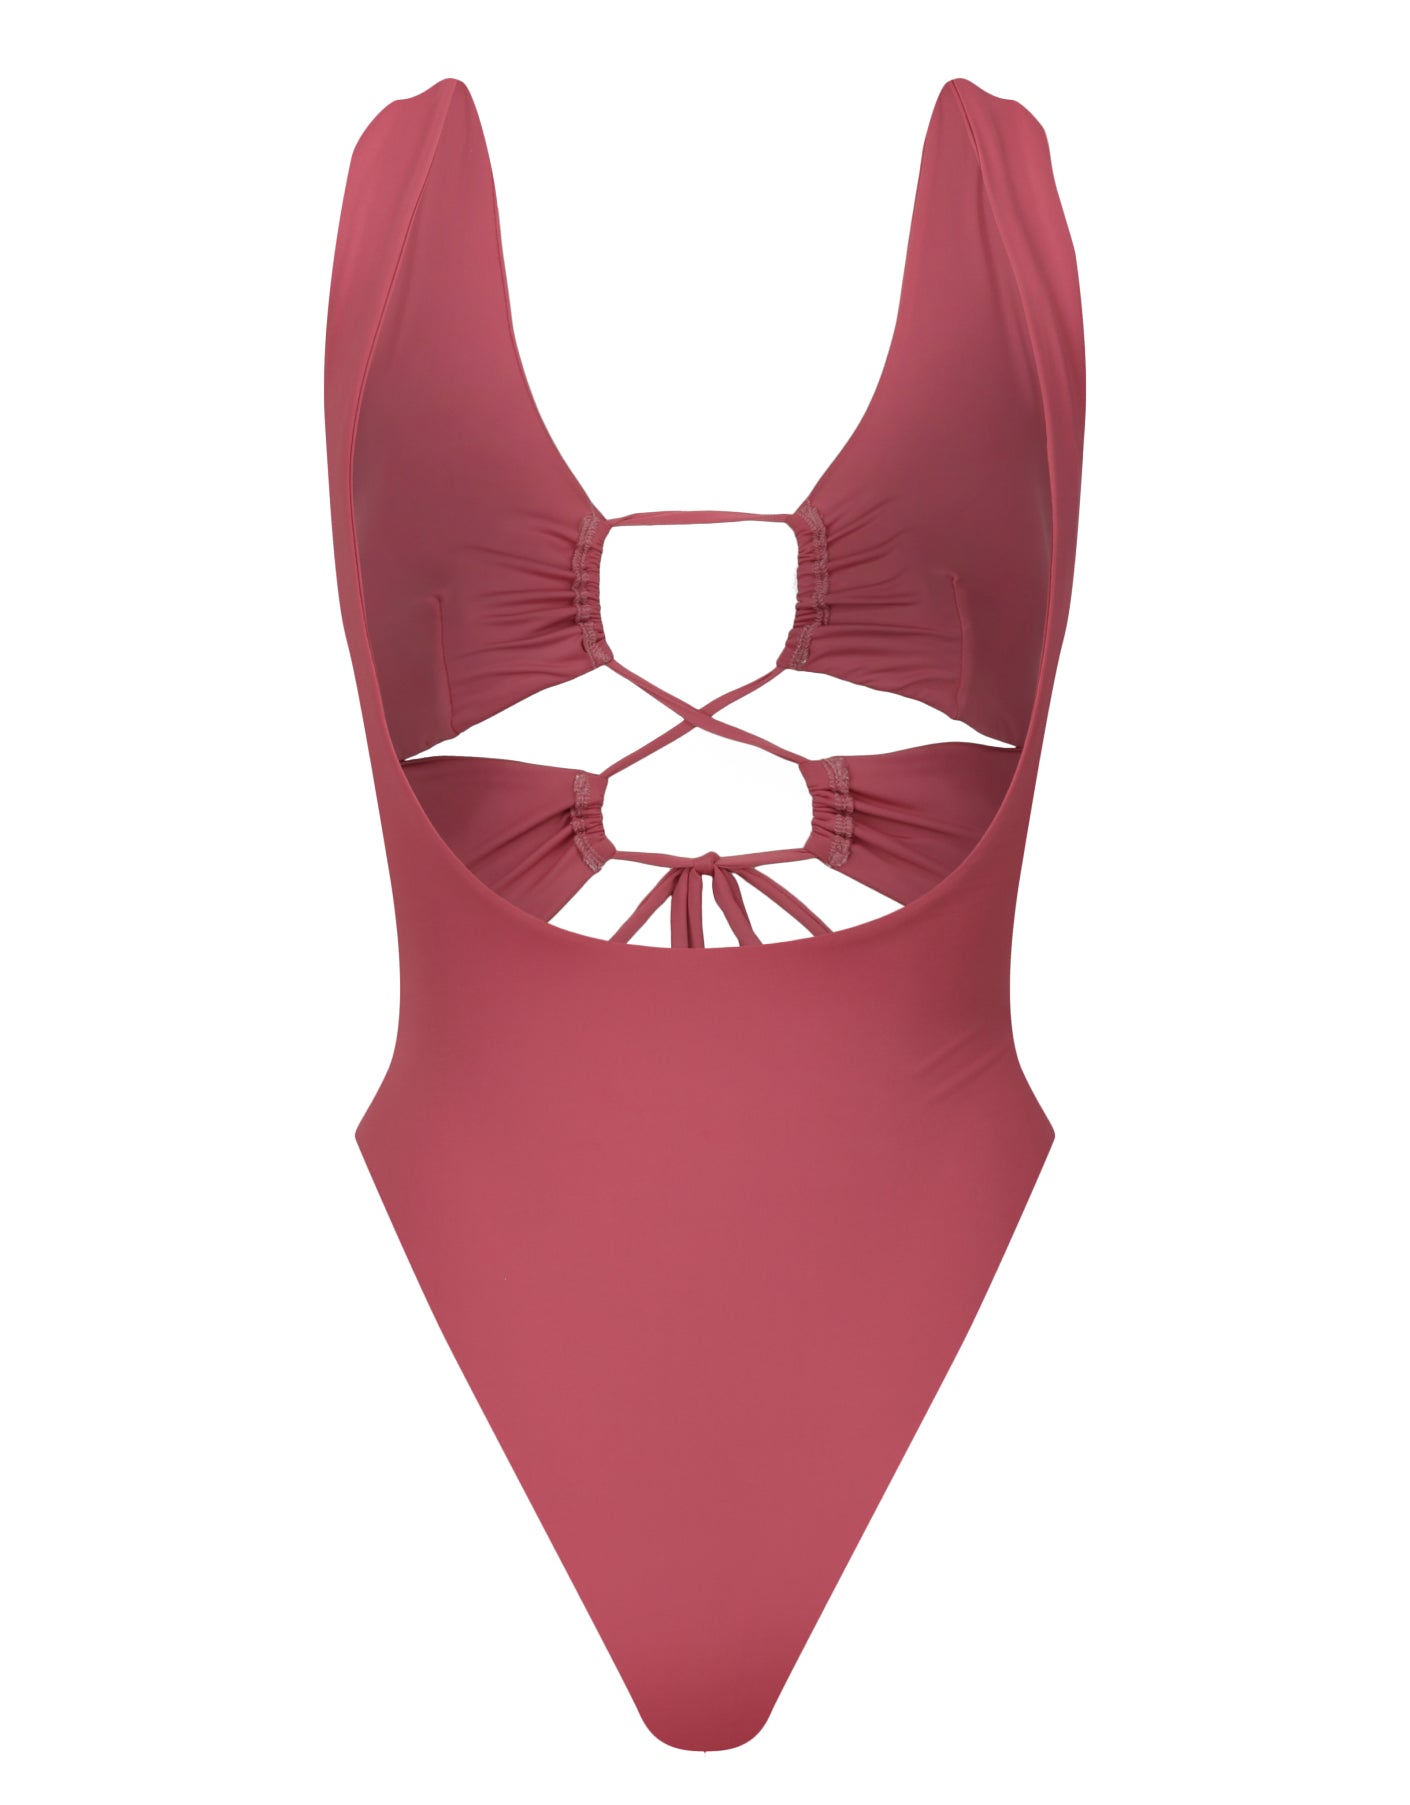 Carib Tie Front Cut Out One Piece // Rose Dark Pink